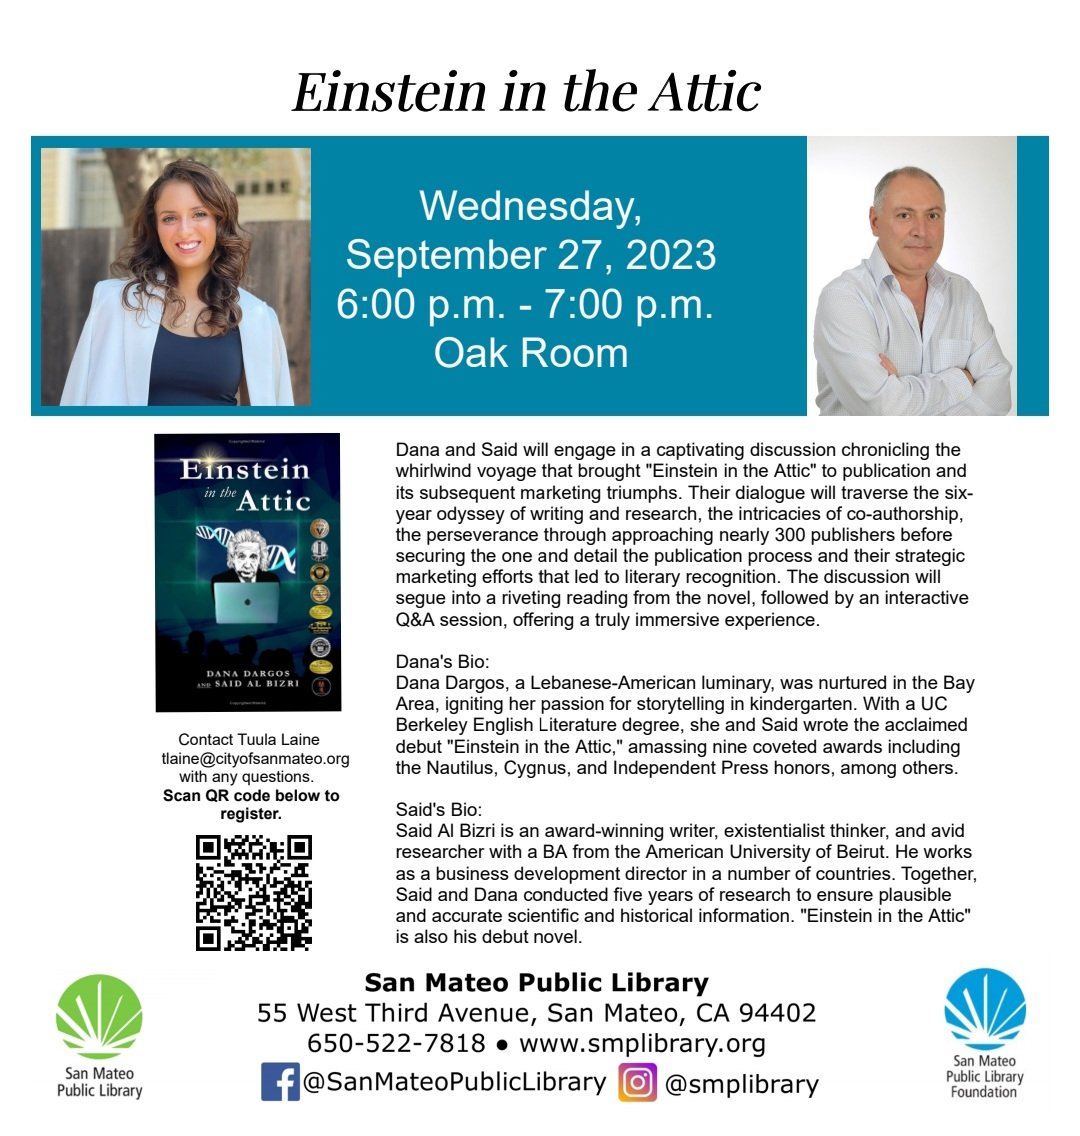 Step right up and meet us at the San Mateo Library, September 27th. Will we be seeing you there? 
.
.
#adventure #bayareawriter #bayarea #einstein_in_the_attic #officialdanadargos #bookauthor #femaleauthor #instaauthor #igauthors #supportauthors #bookwriter #sanmateoca…